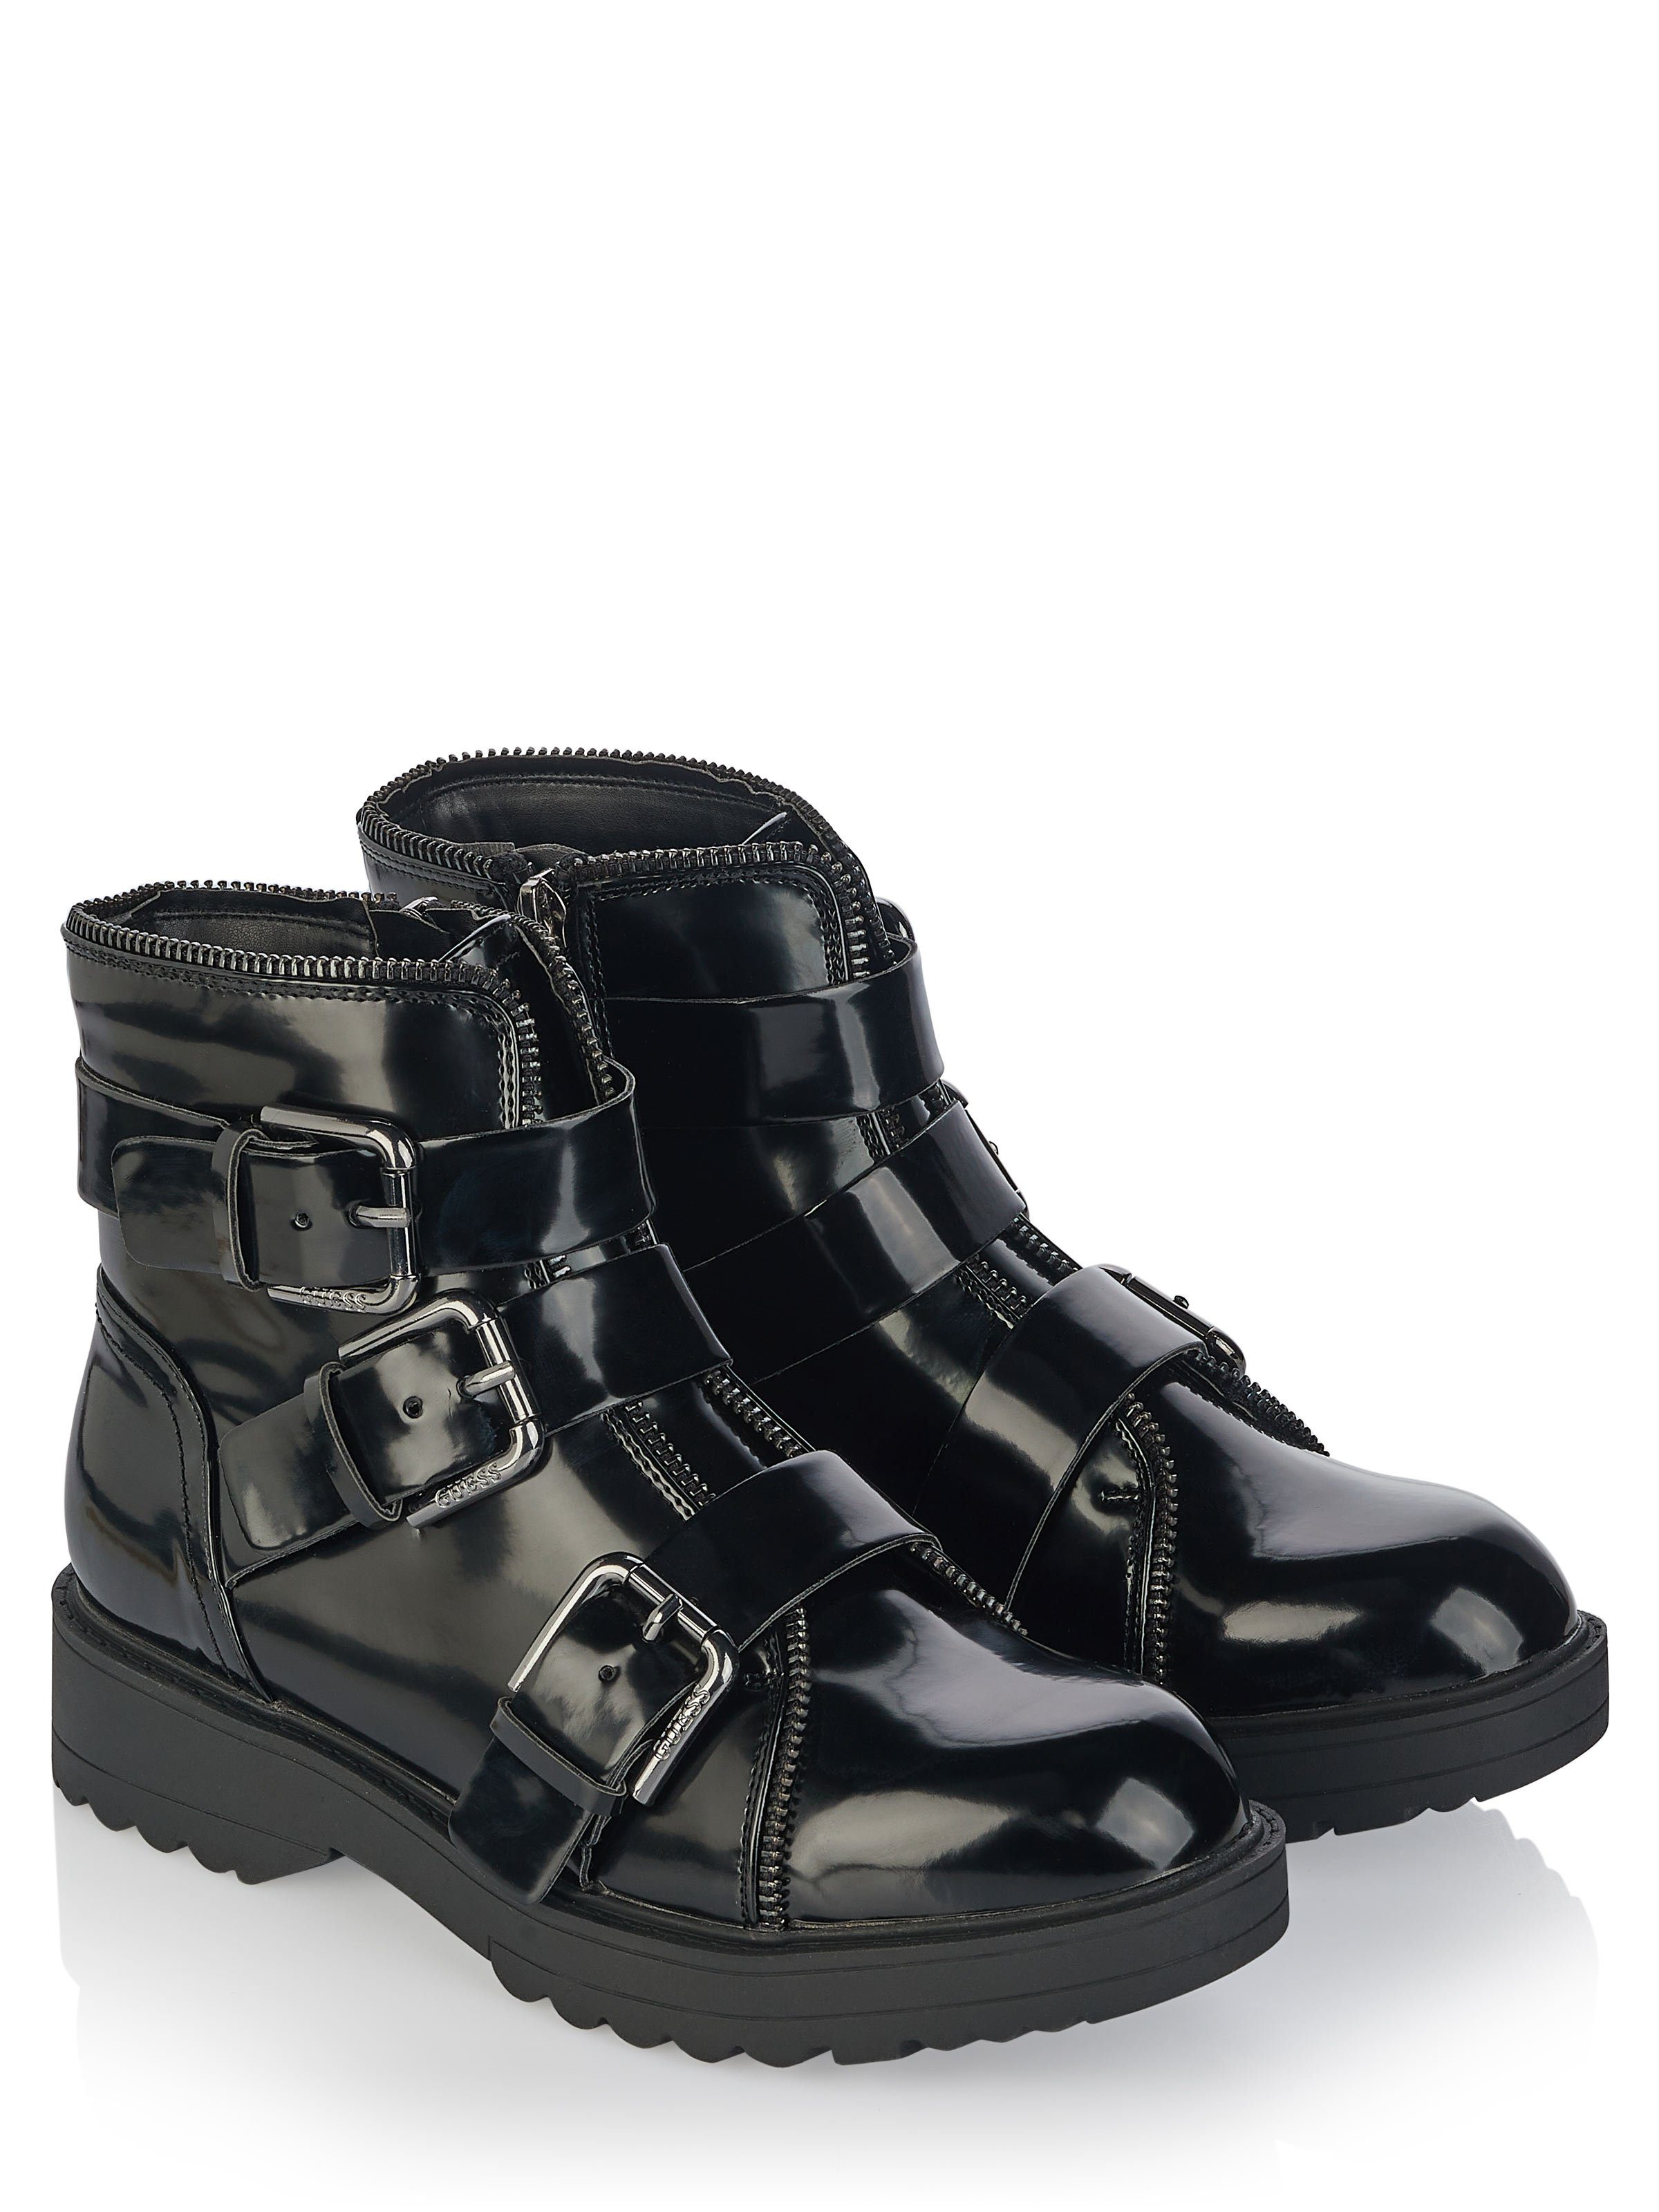 Guess GUESS Stiefel schwarz Ankleboots